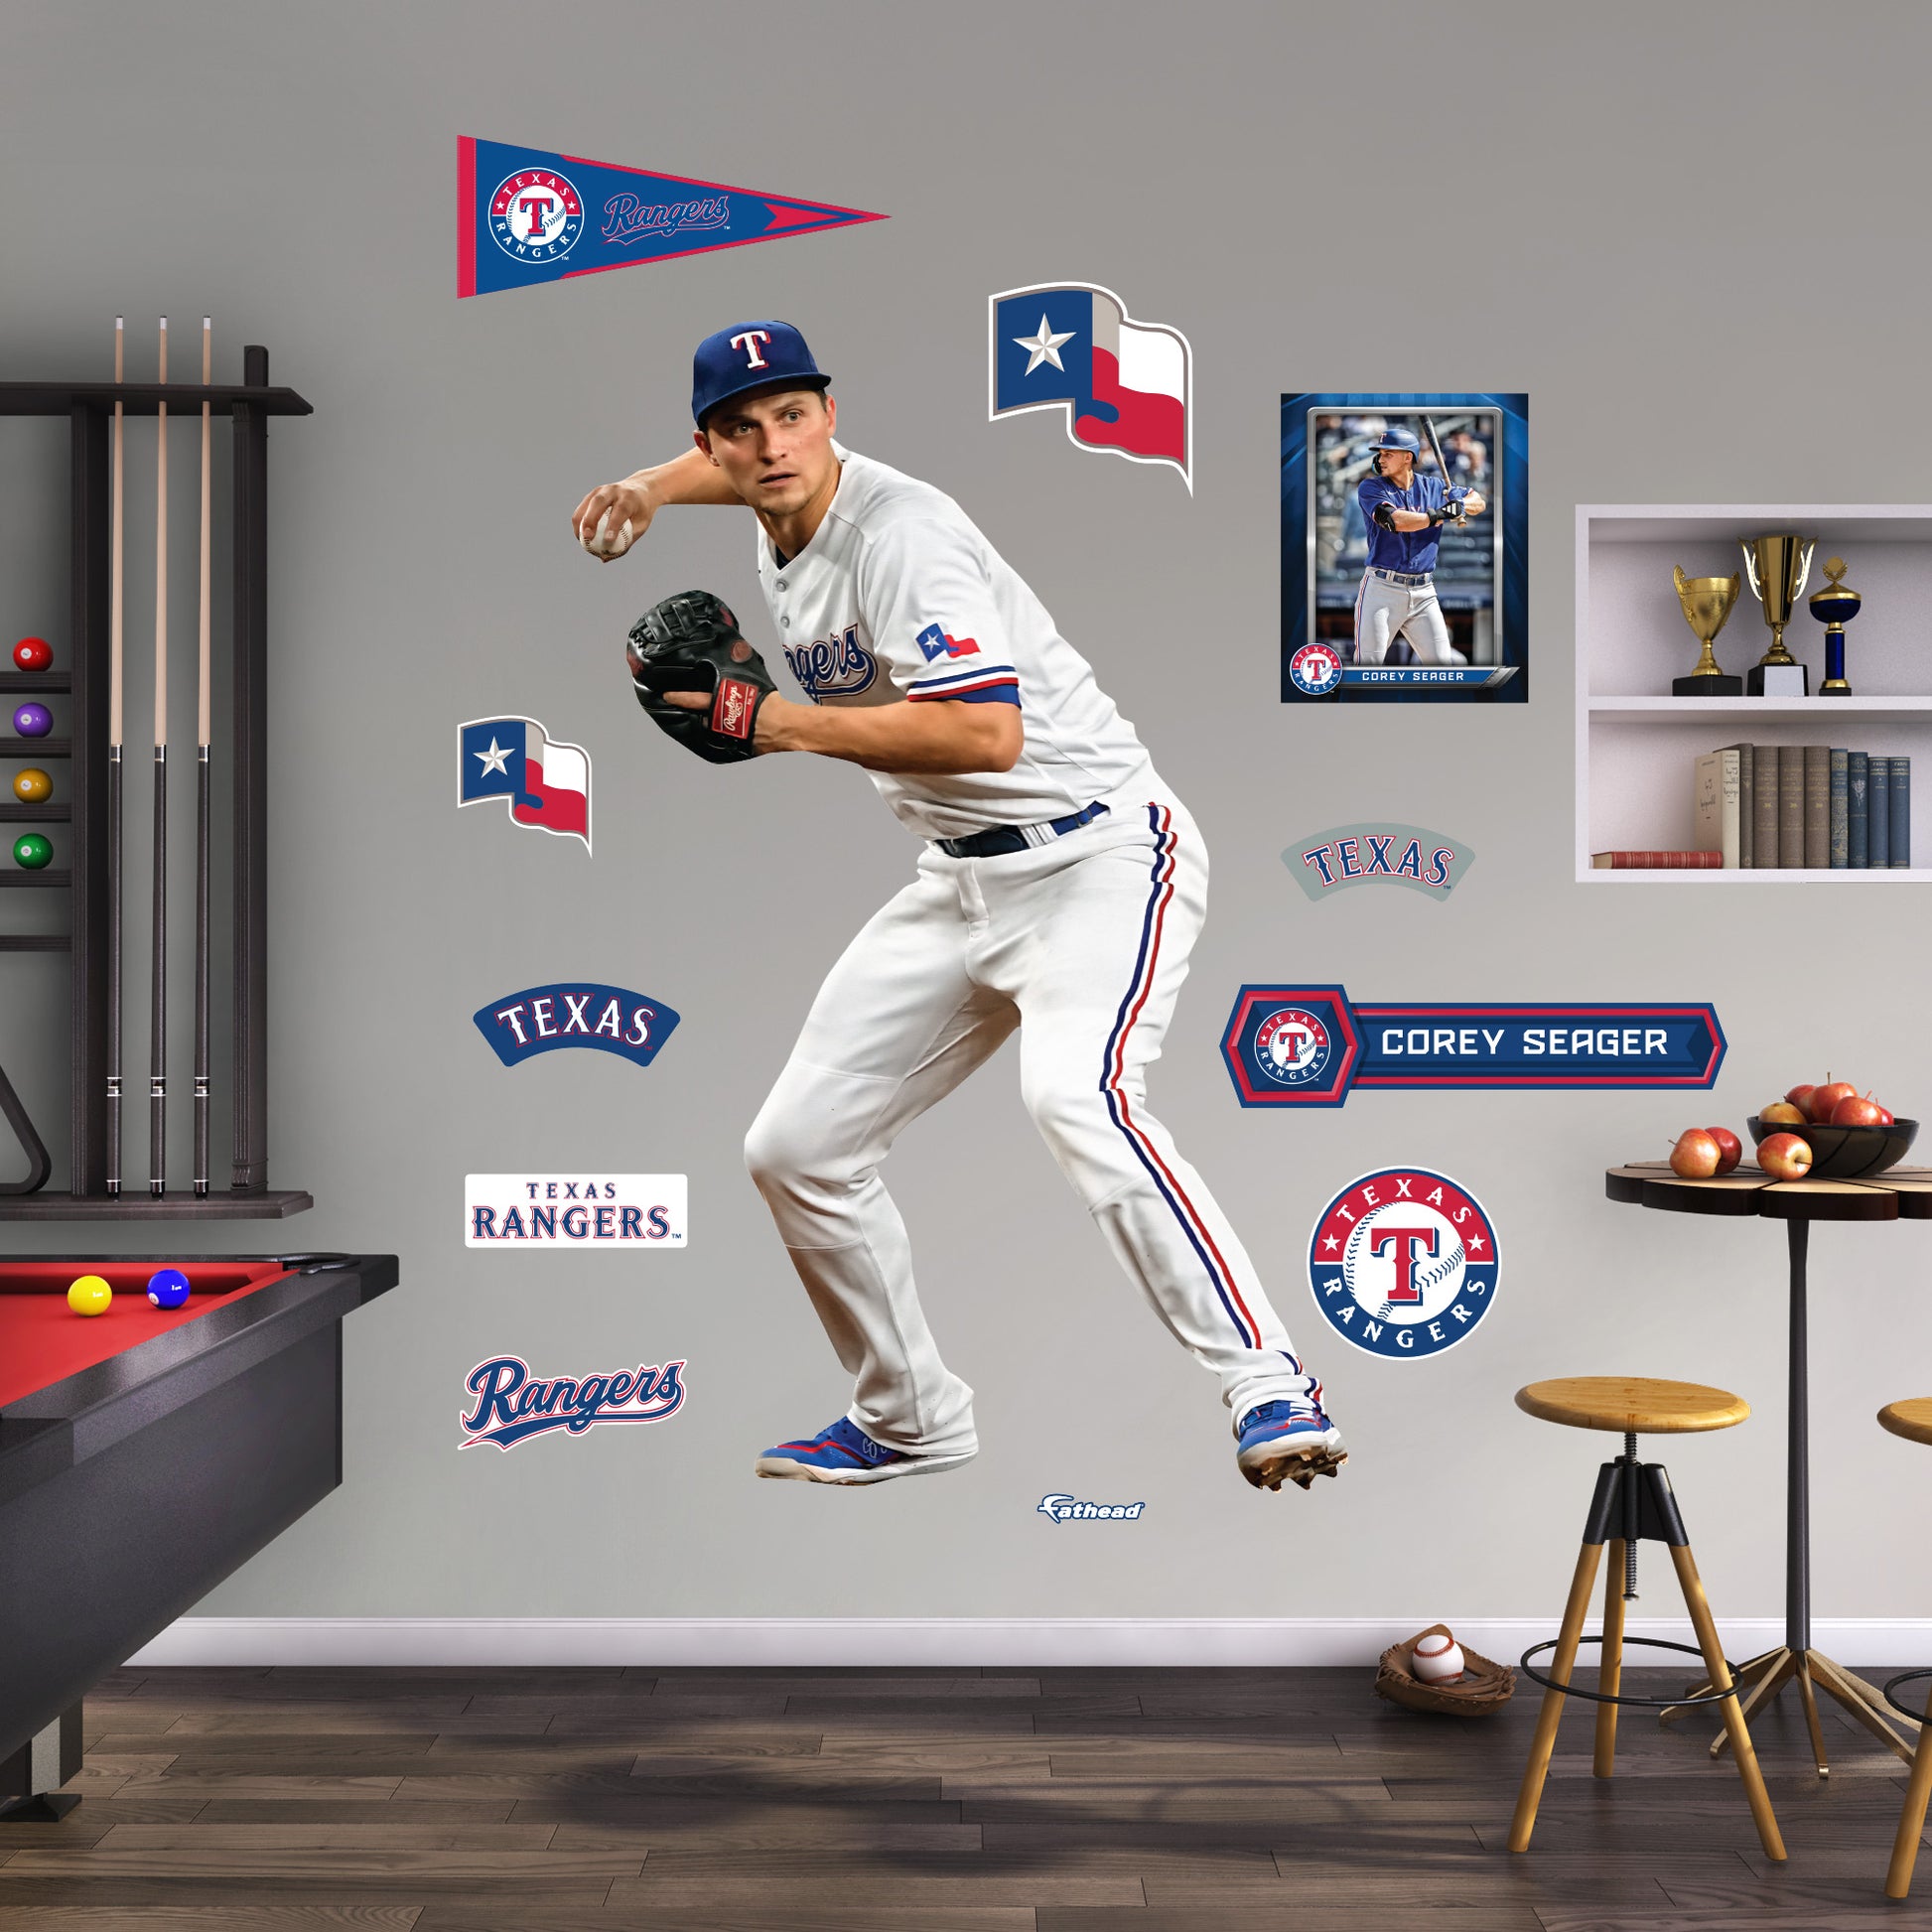 Texas Rangers Apparel, Officially Licensed